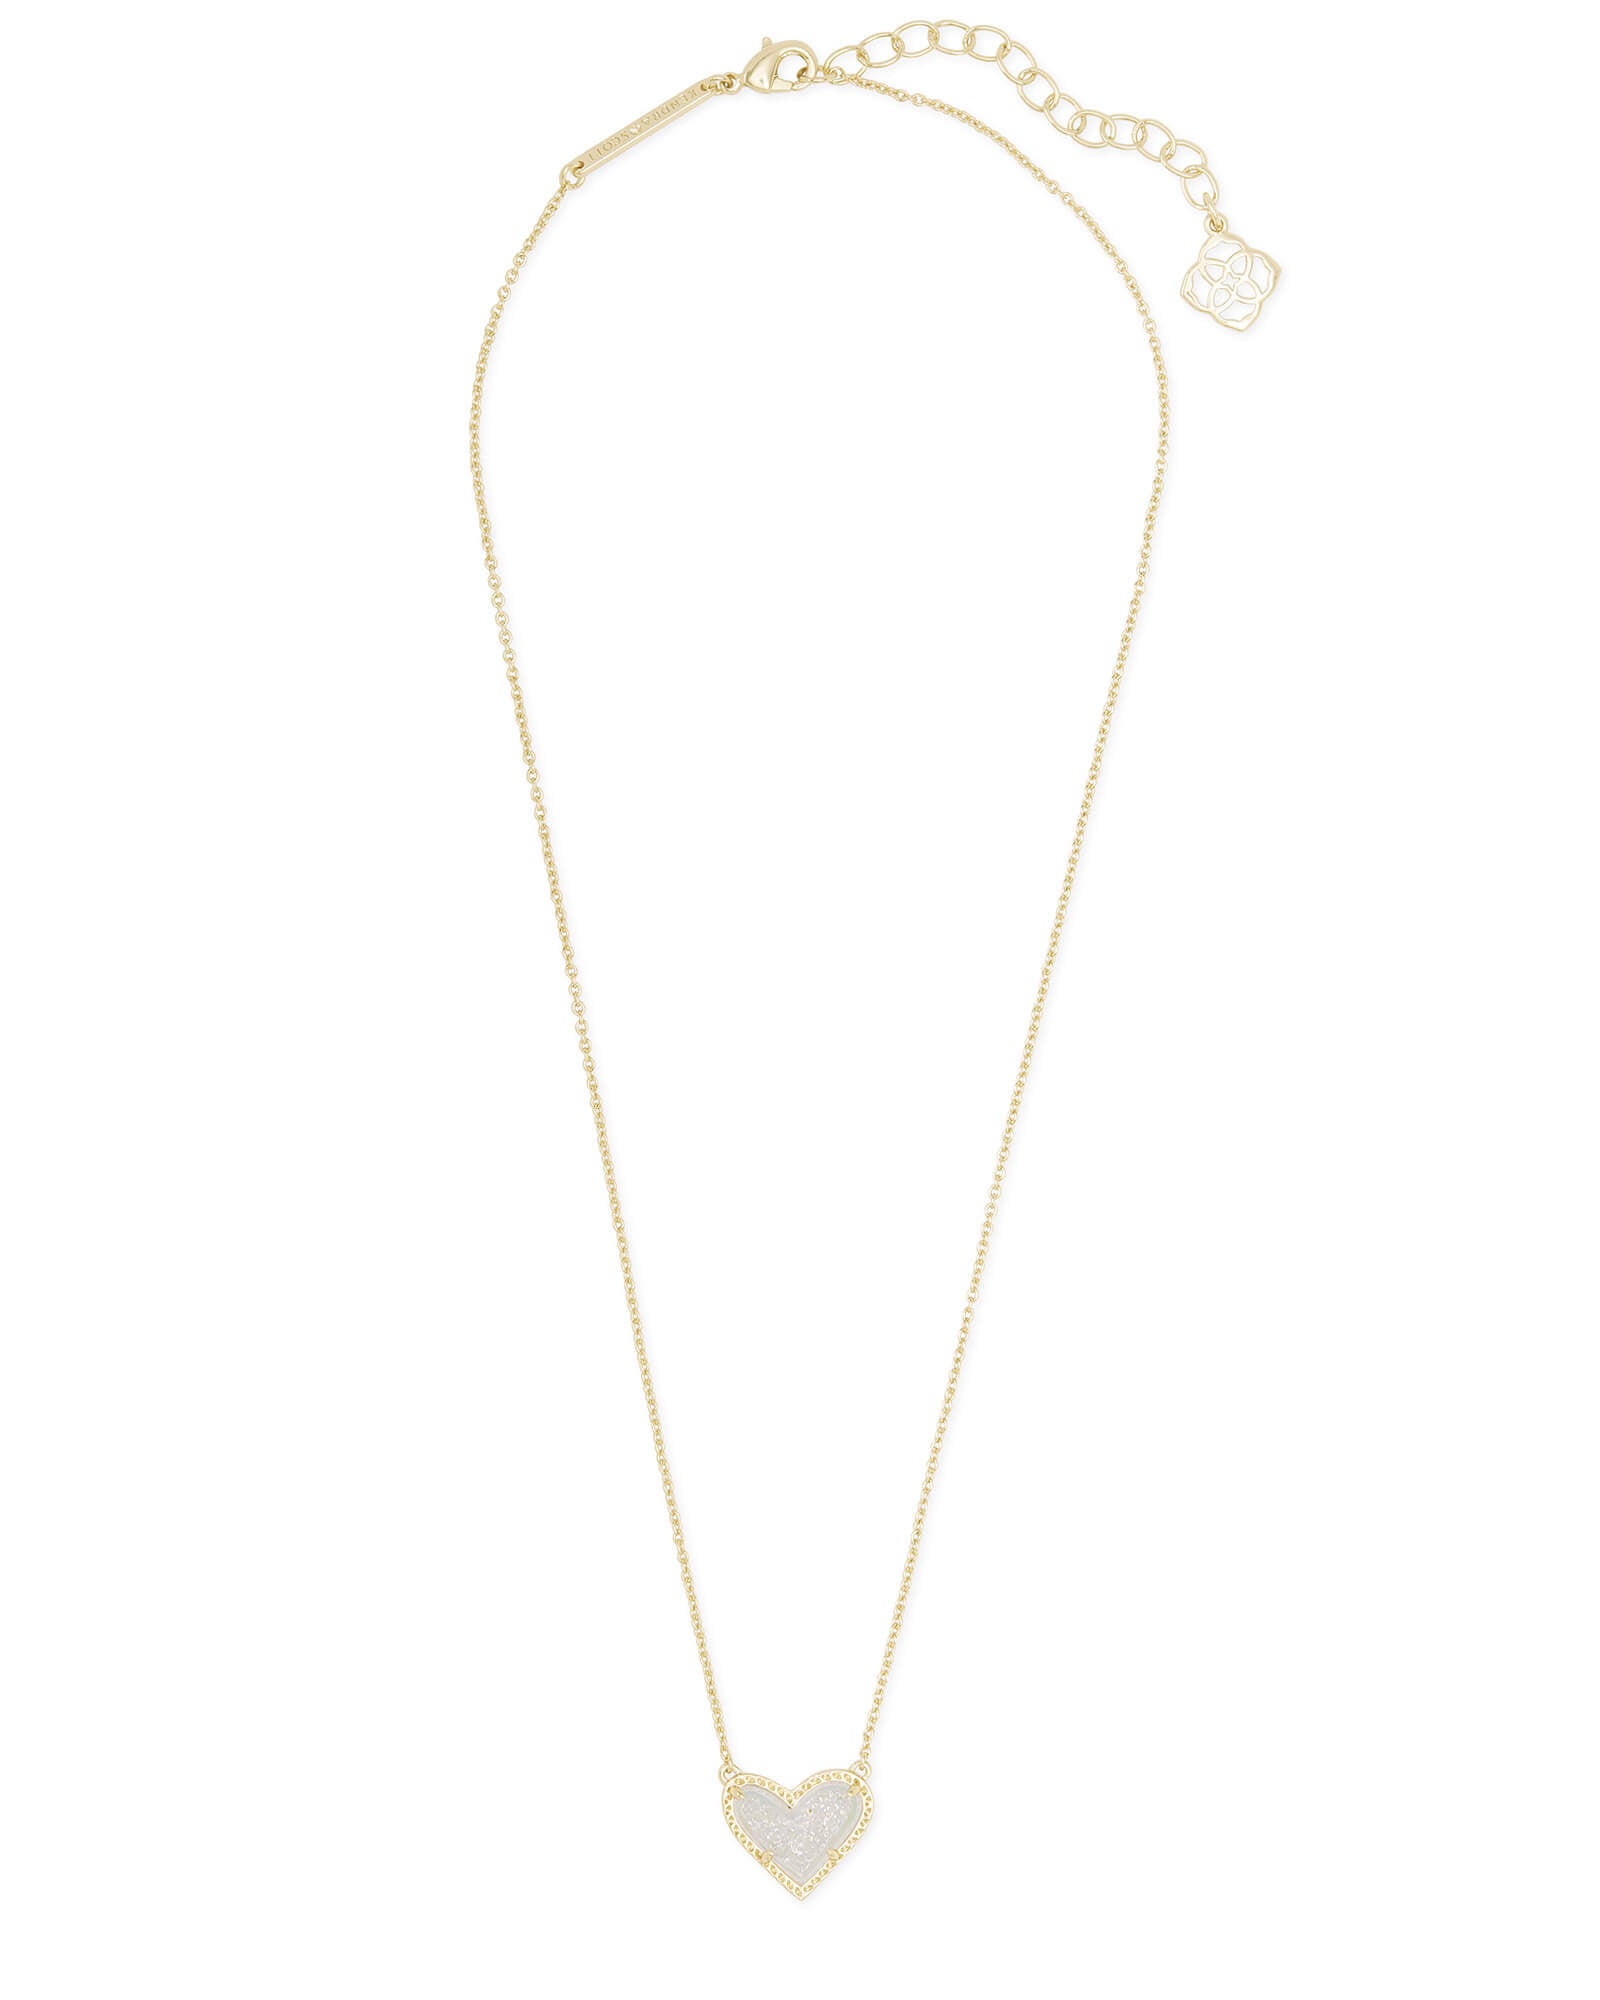 Kendra Scott Ari Heart Pendant Necklace in Iridescent Drusy and Gold